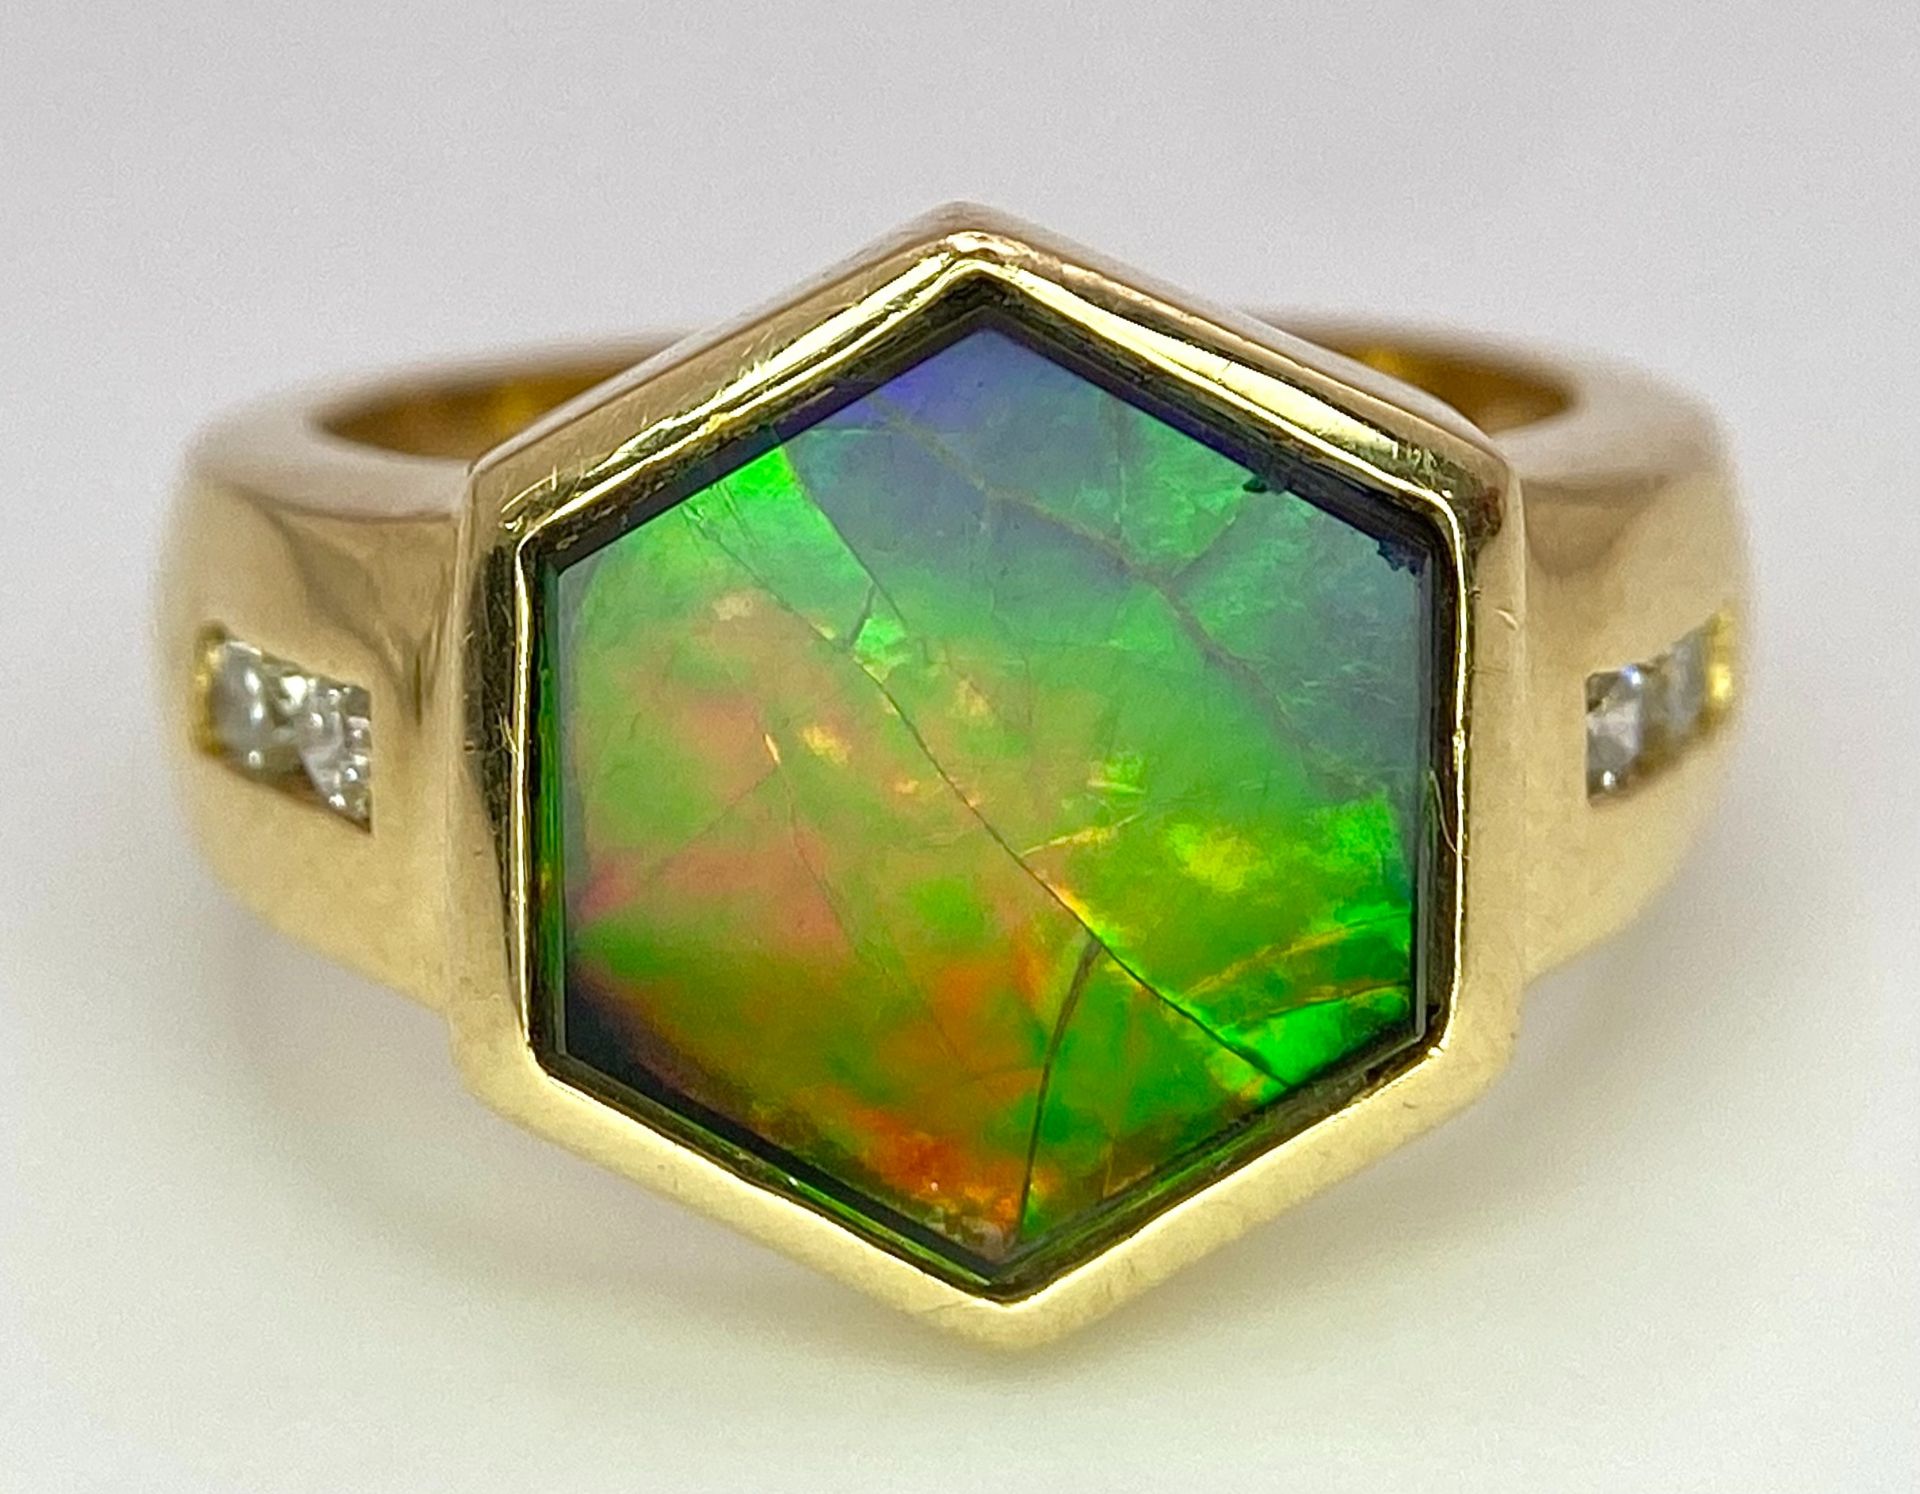 A Very Different, 14K Gold, Ammolite and Diamond Ring. Hexagonal shape. Size L. 6.3g total weight. - Image 4 of 9